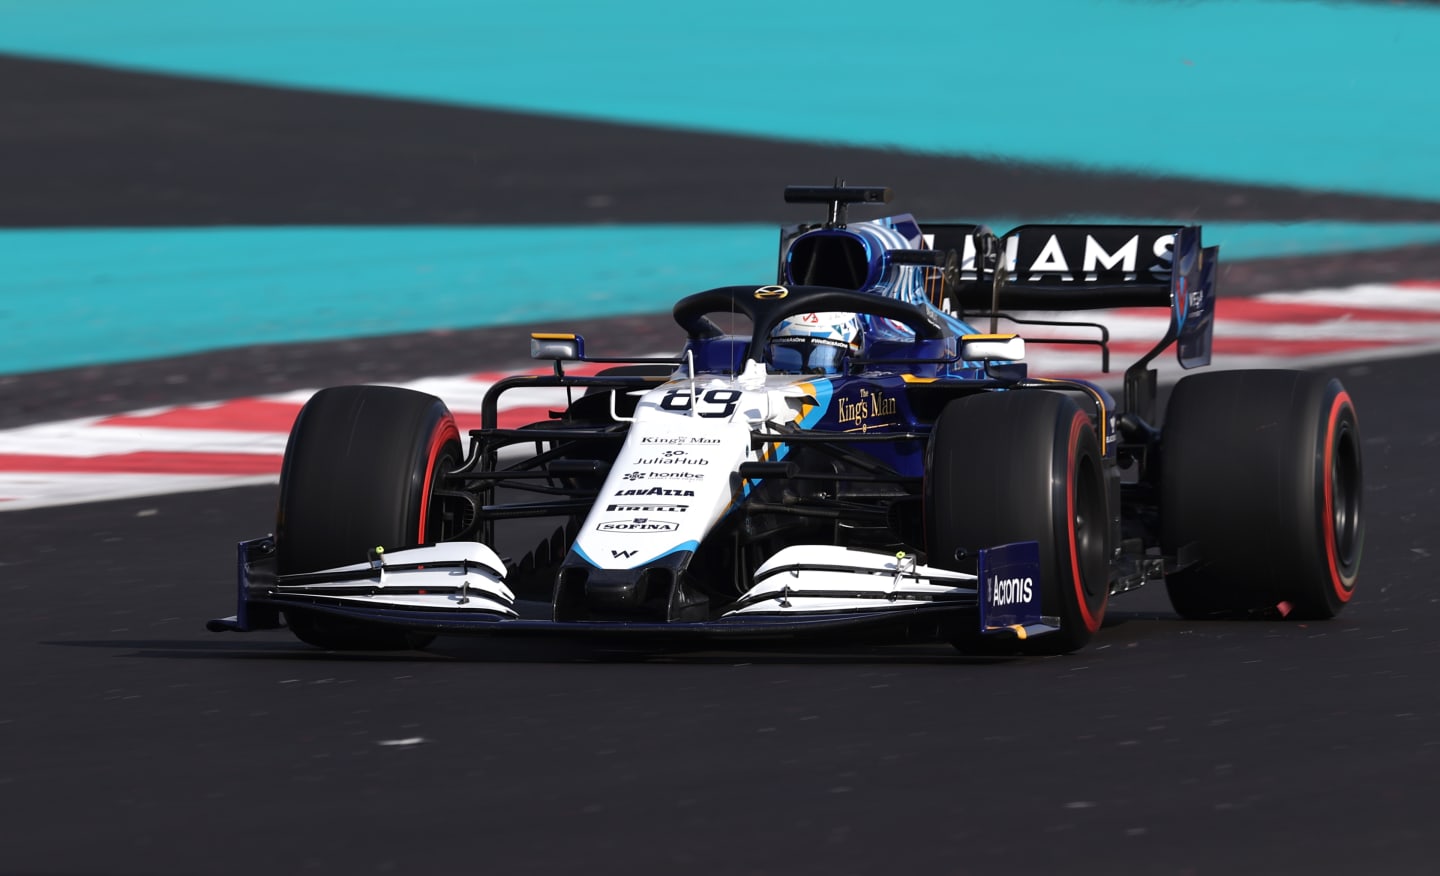 ABU DHABI, UNITED ARAB EMIRATES - DECEMBER 10: Jack Aitken of Great Britain driving the Williams Racing FW43 Mercedes during practice ahead of the F1 Grand Prix of Abu Dhabi at Yas Marina Circuit on December 10, 2021 in Abu Dhabi, United Arab Emirates. (Photo by Lars Baron/Getty Images)